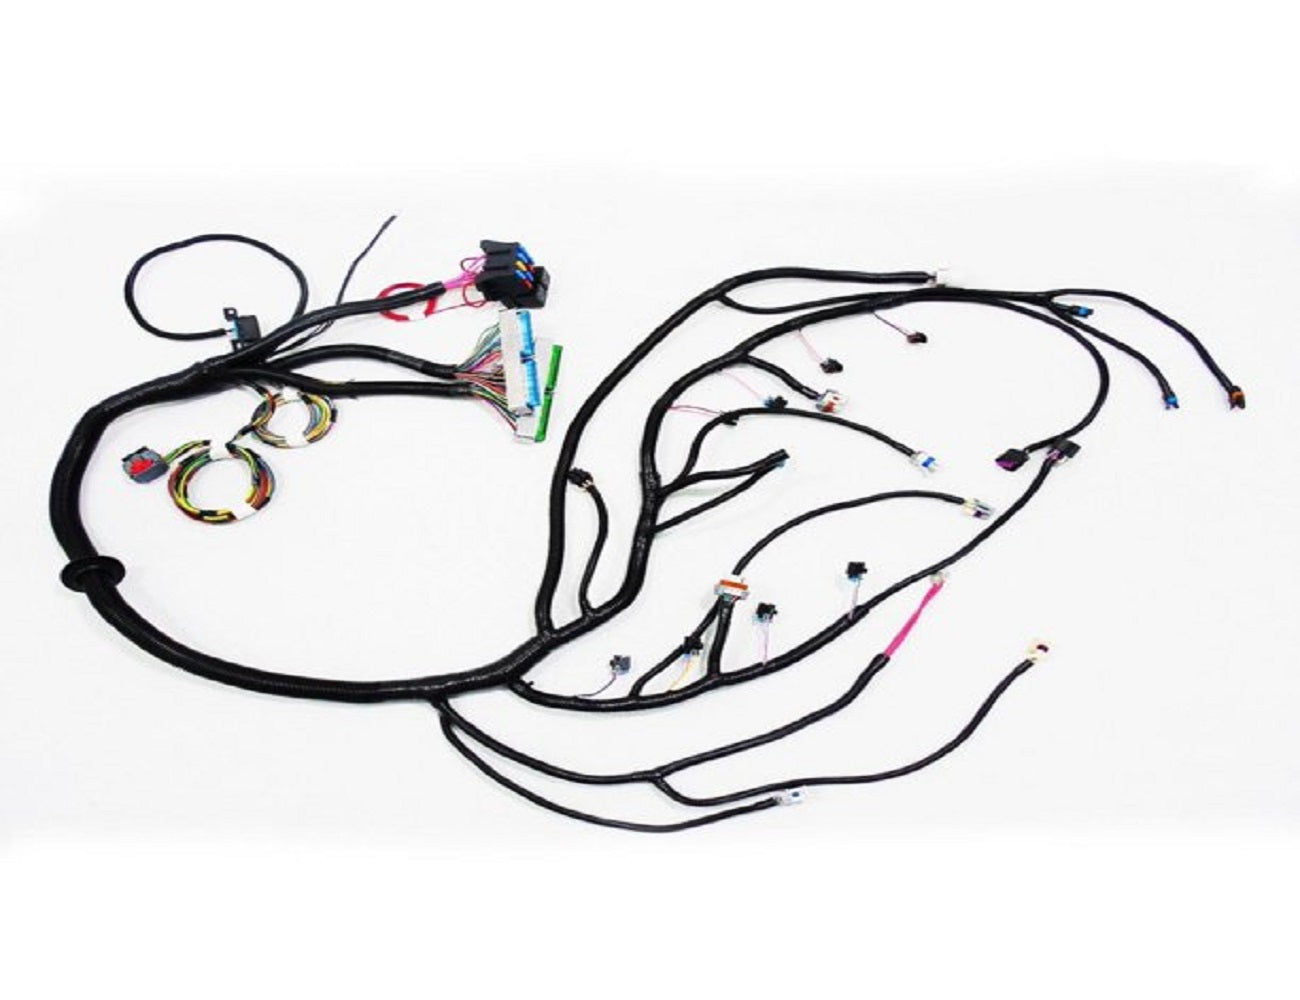 03-07 LS Vortec Standalone Wiring Harness Drive By Cable 4L80E 4.8 5.3 6.0 DBC